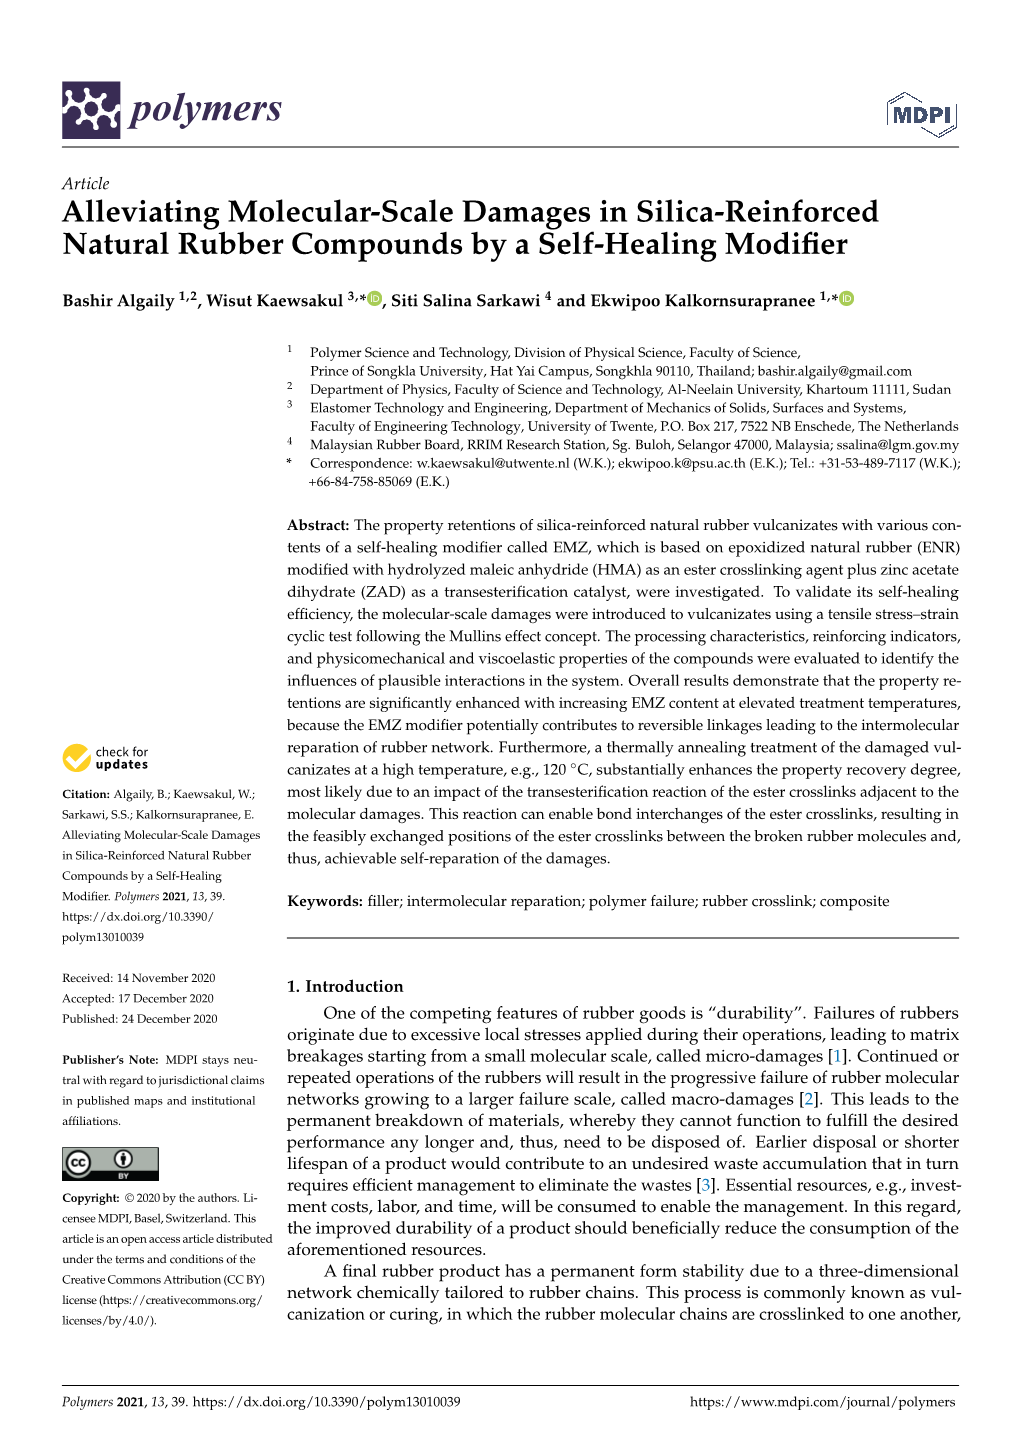 Alleviating Molecular-Scale Damages in Silica-Reinforced Natural Rubber Compounds by a Self-Healing Modiﬁer